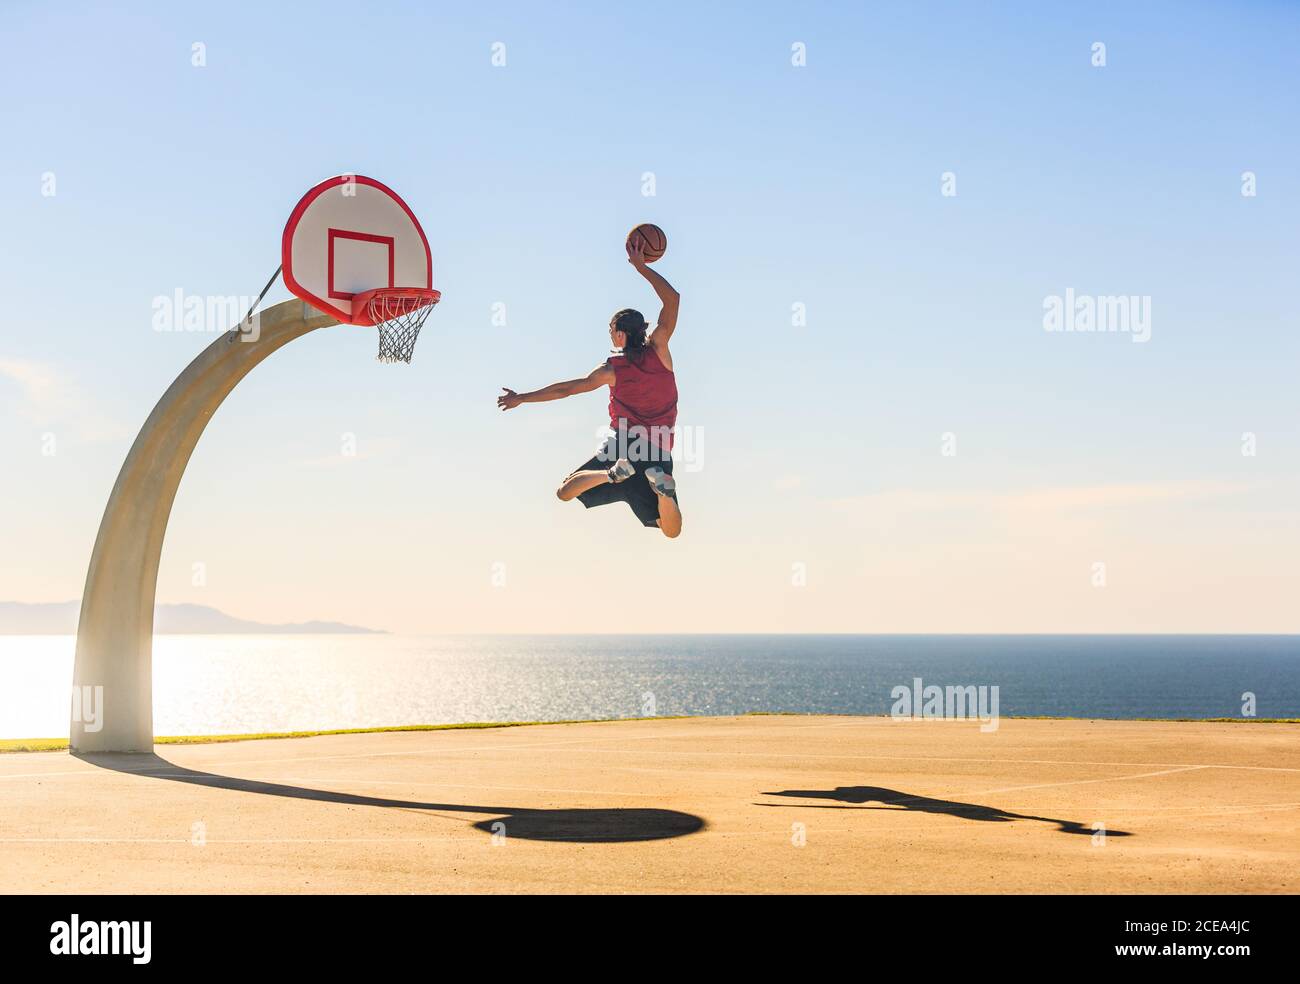 Basketball player scoring an amazing energetic dunk elevating at the street ball court with an ocean view as background. Sports, motivation and boost. Stock Photo